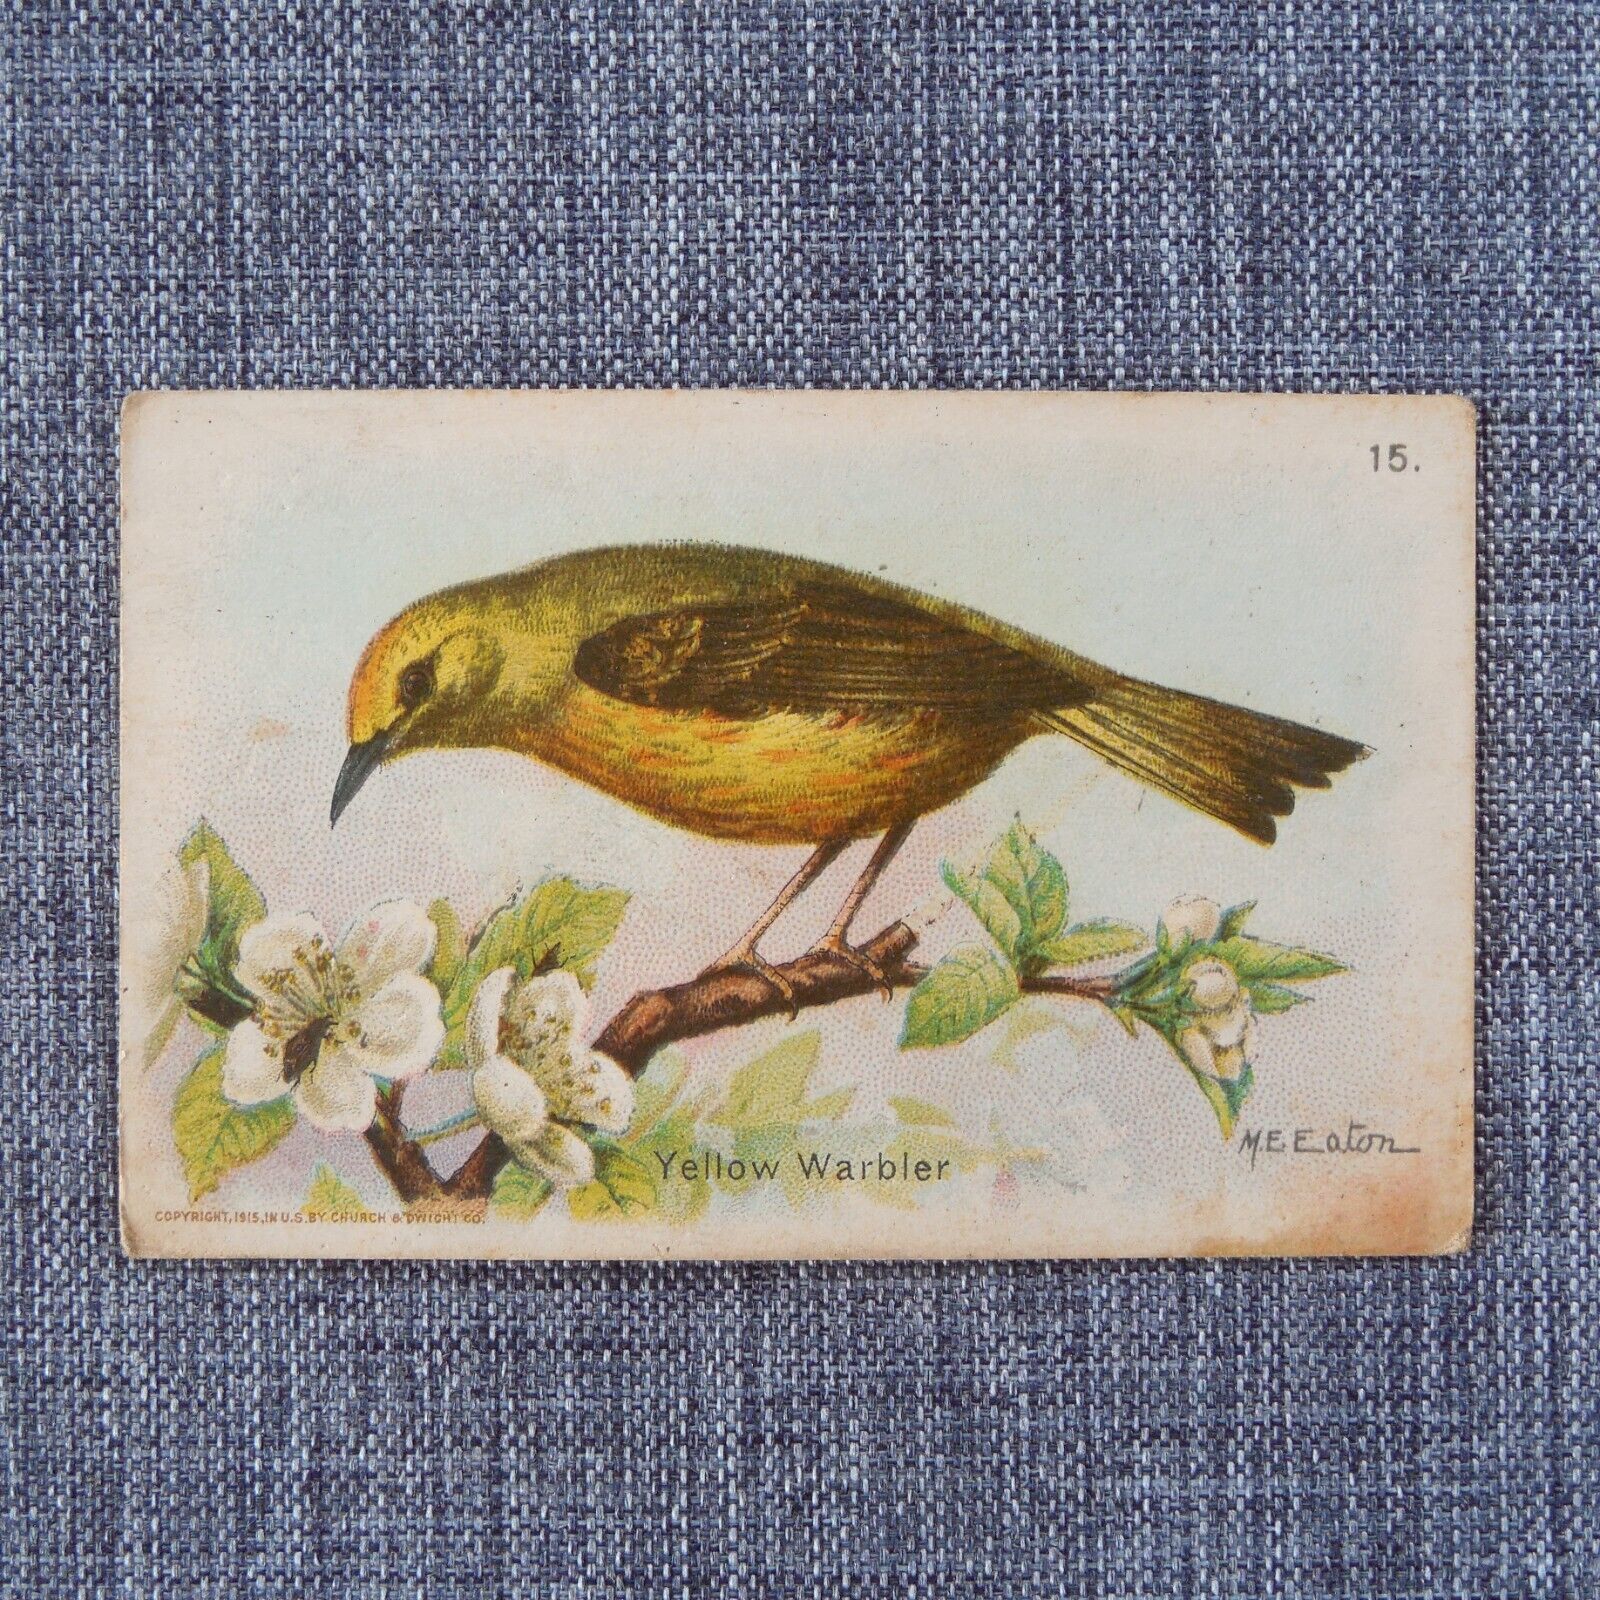 YELLOW WARBLER #15 Arm & Hammer Useful Birds of America Fifth Series Card 1933